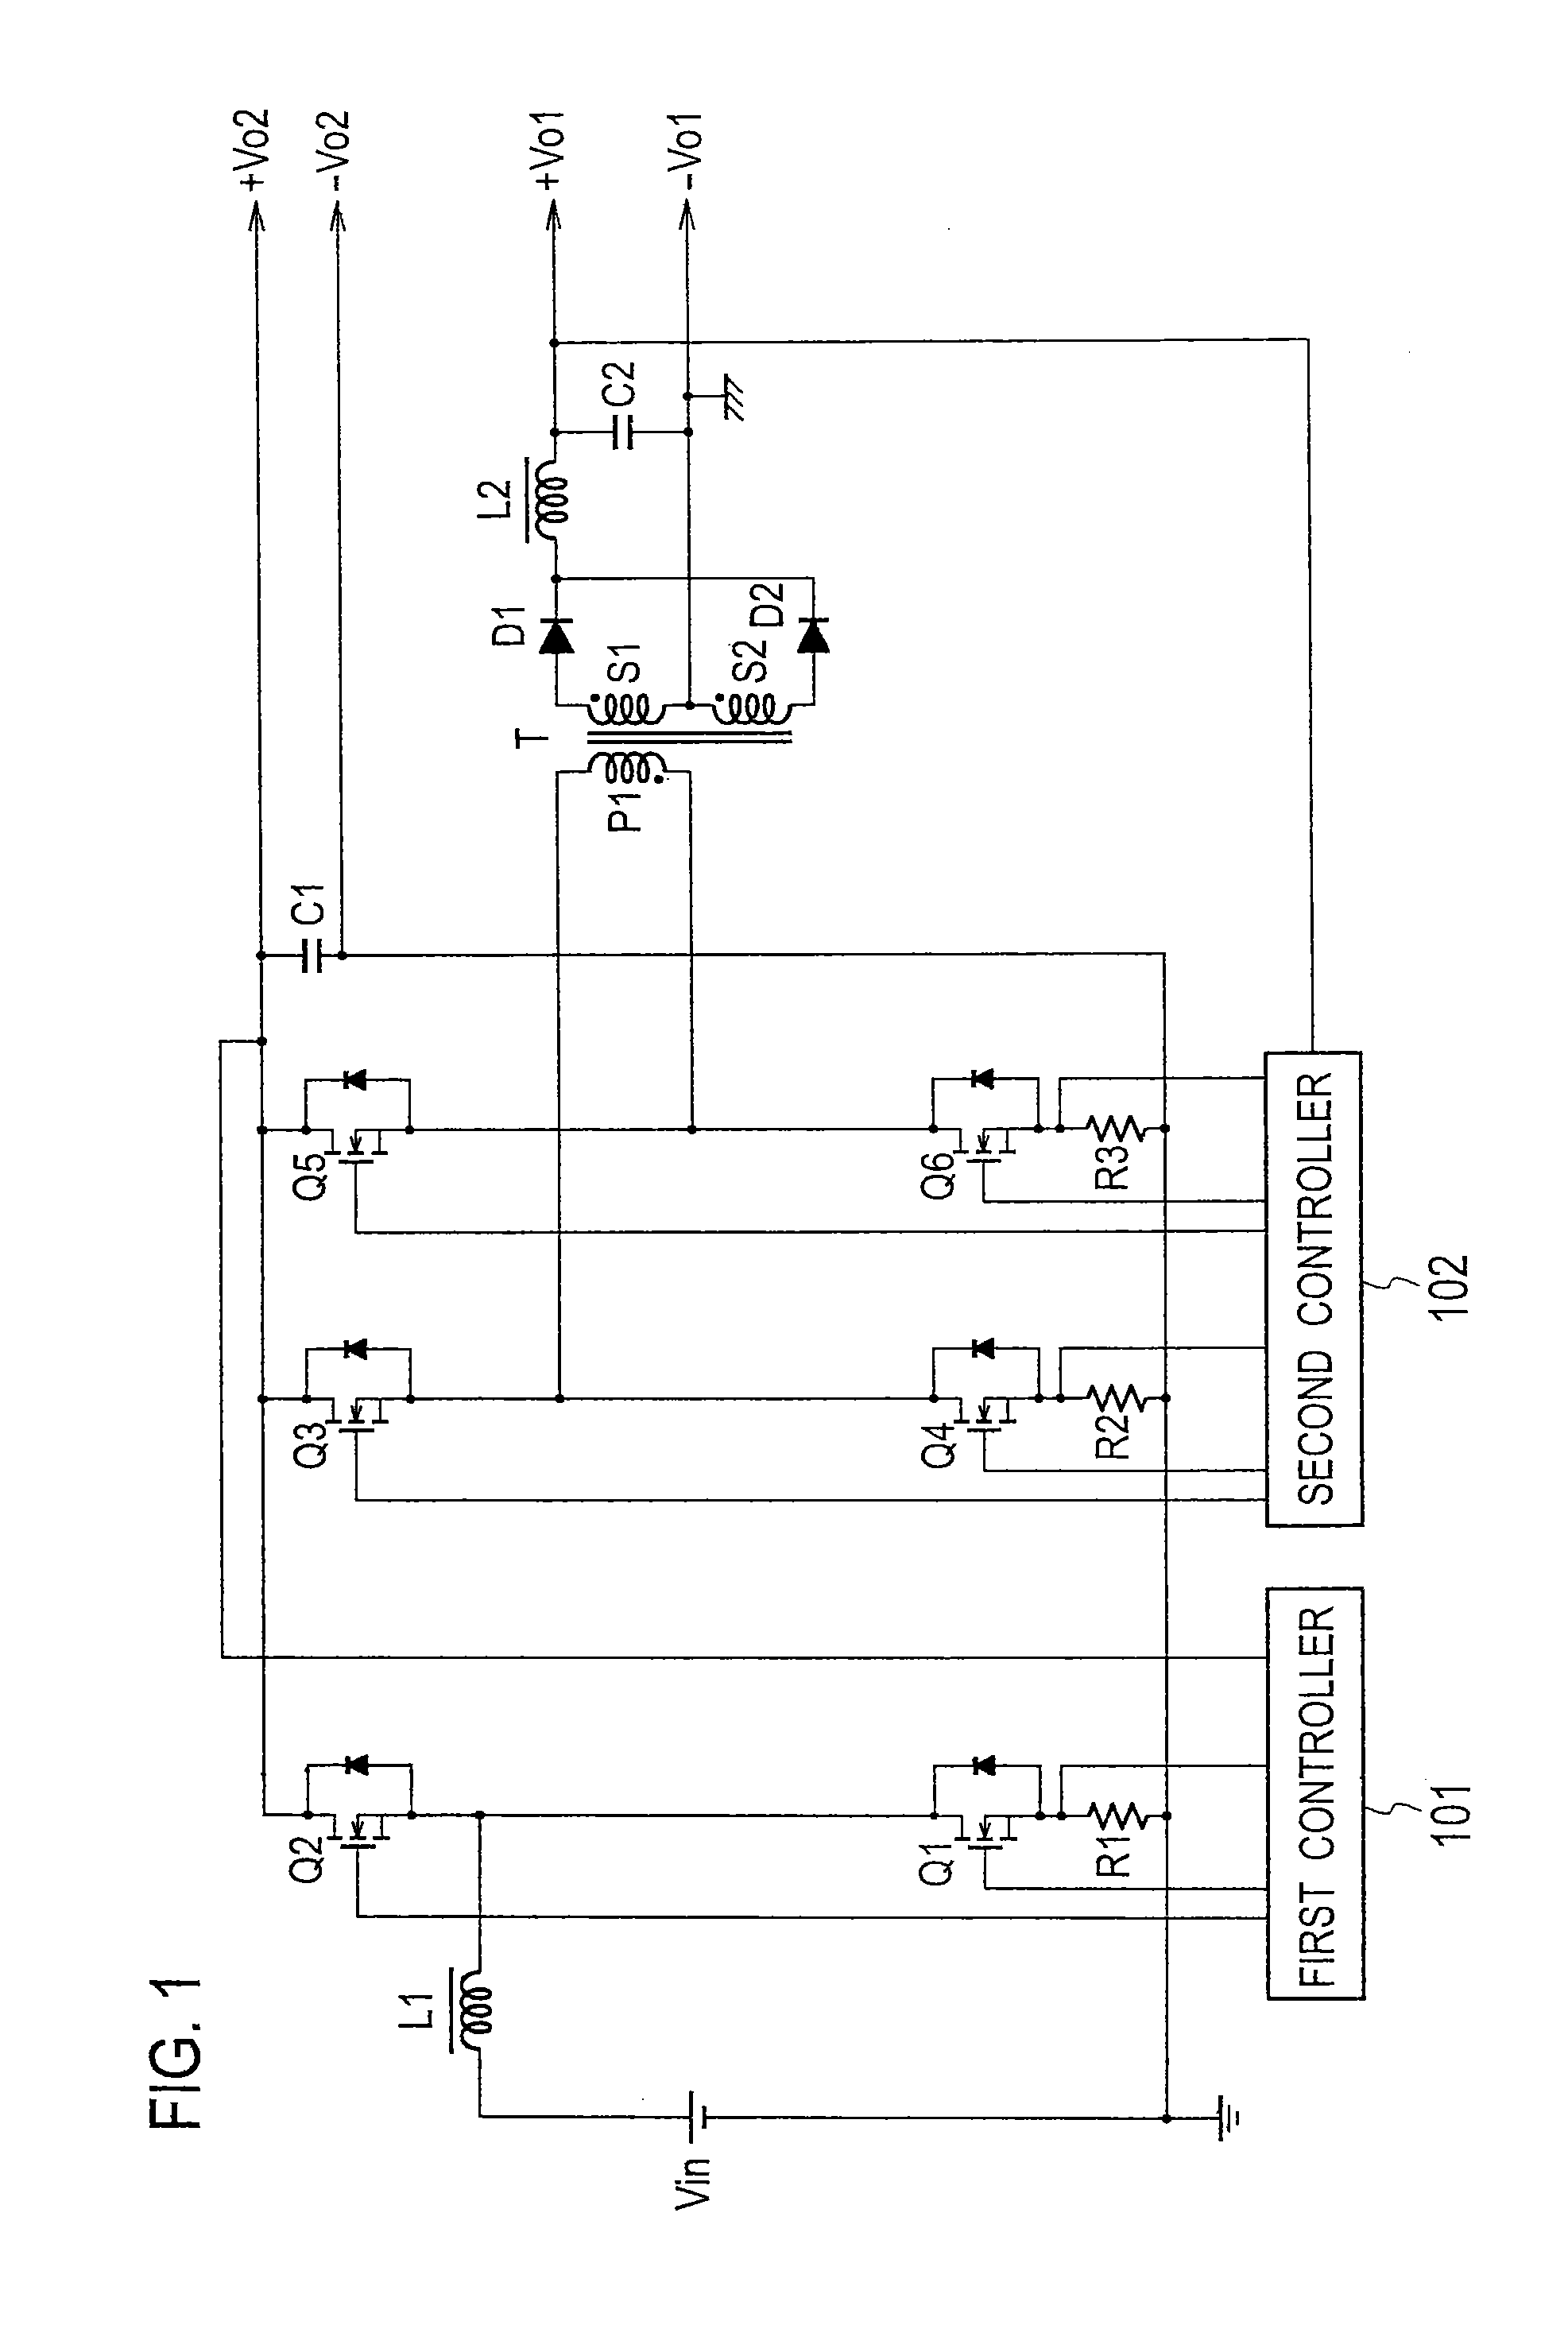 Inverter bridge switching power source utlizing a capacitor with transformer for multiple outputs